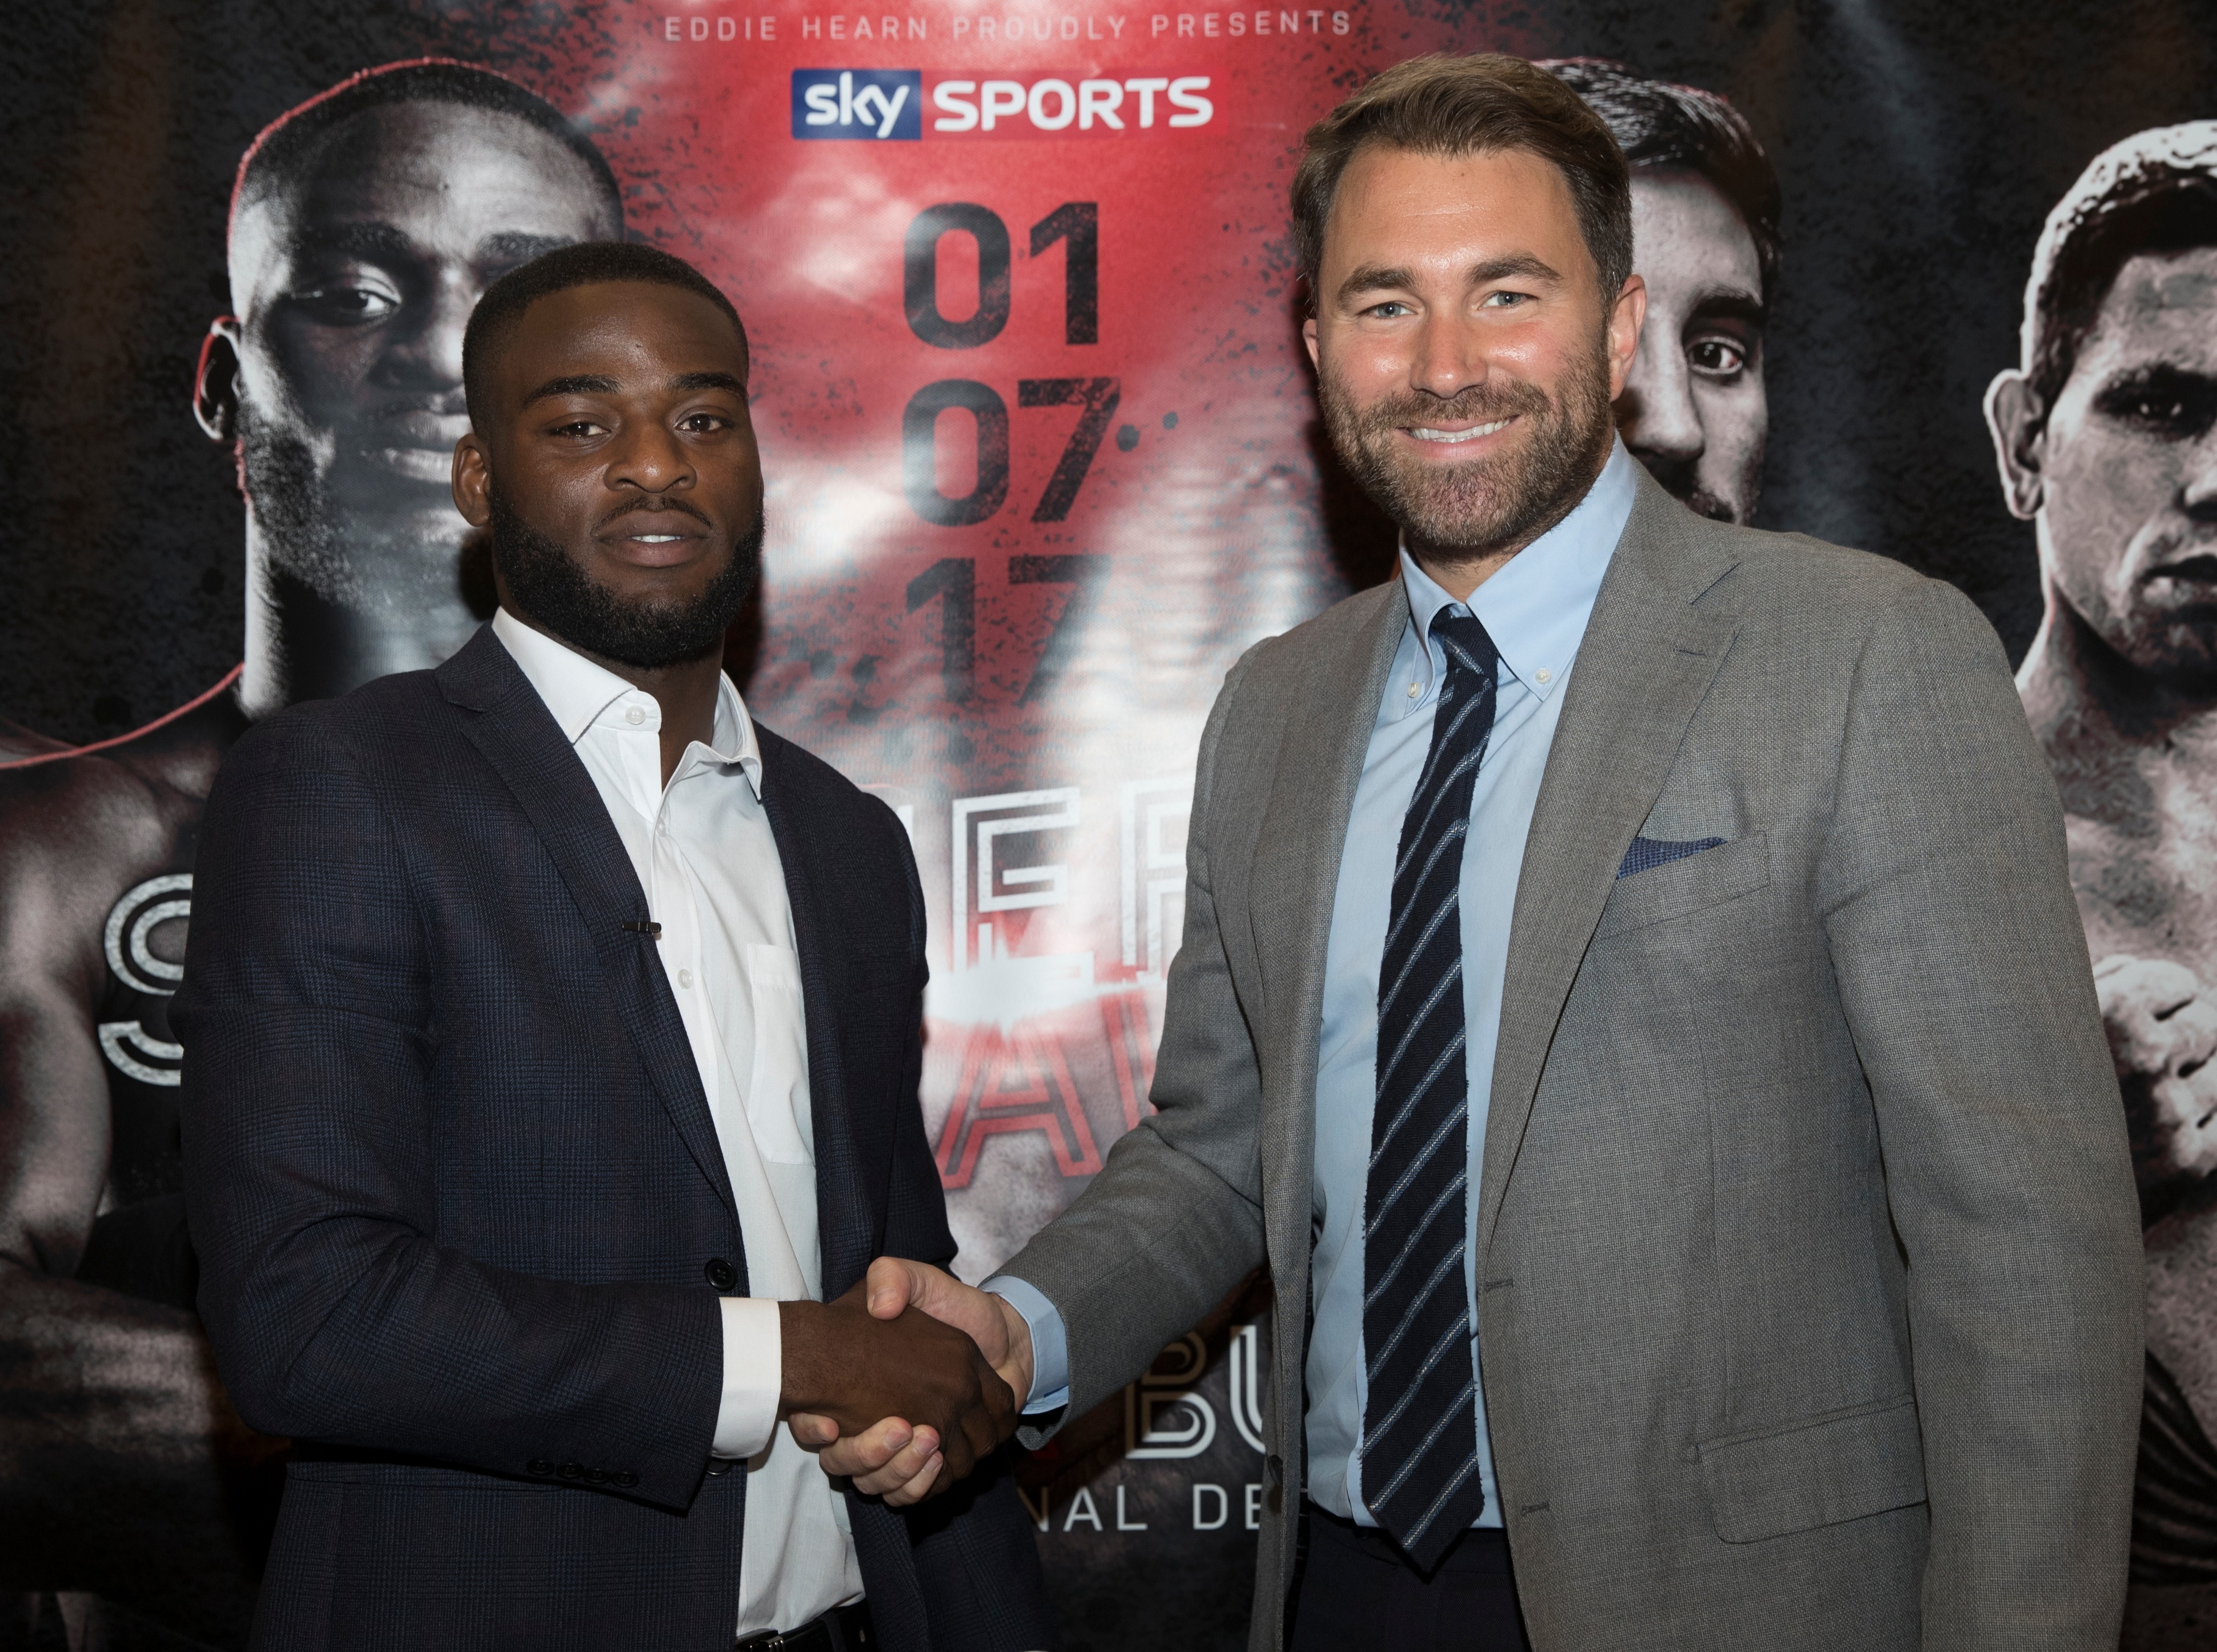 , ‘Who actually watched that?’ – Joshua Buatsi launches blistering attack on Eddie Hearn after leaving DAZN for Sky Sports